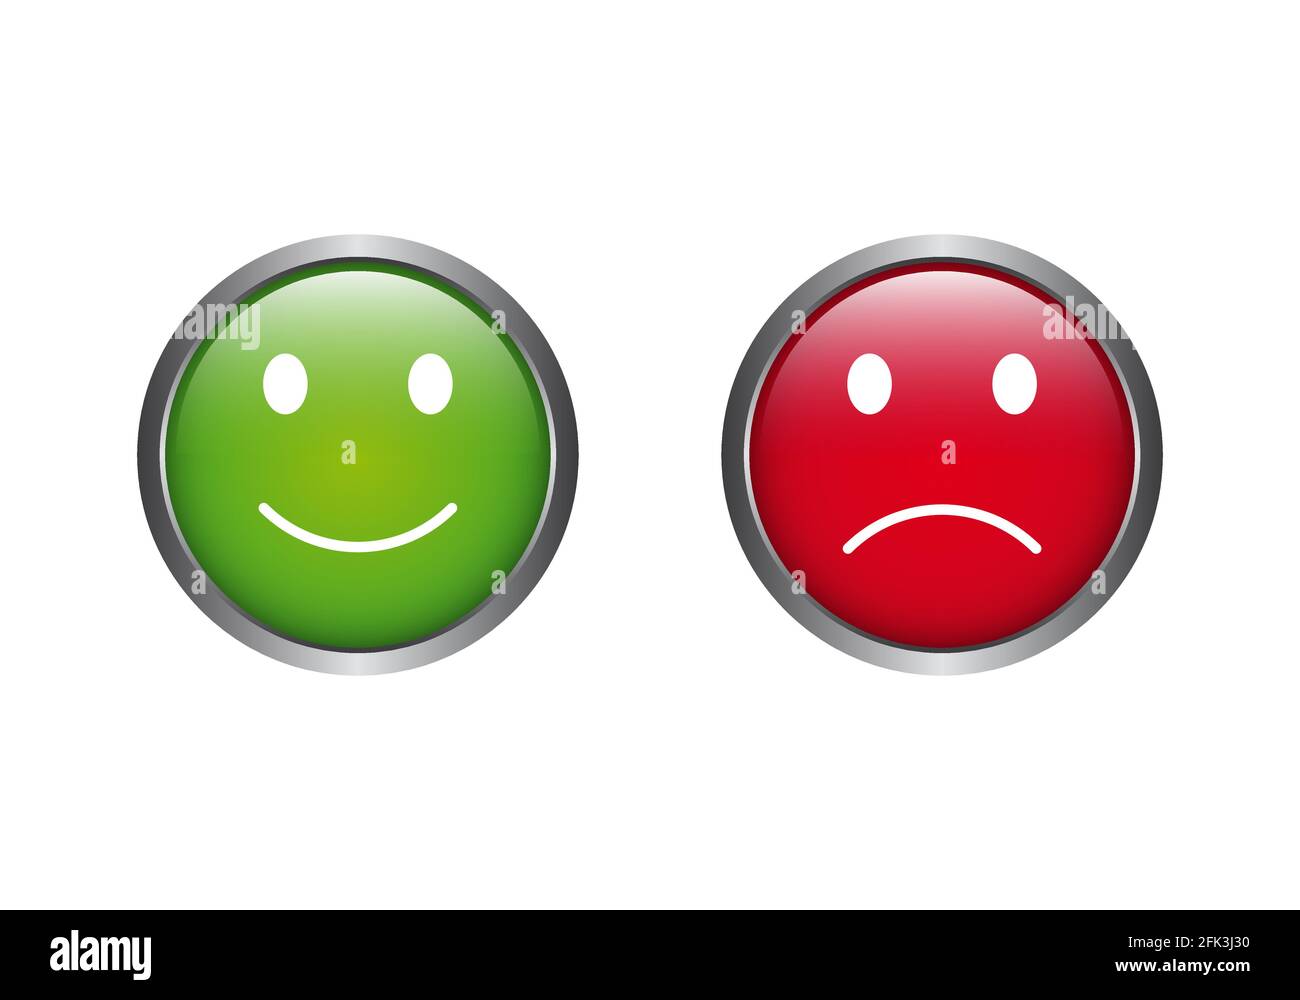 Feedback buttons with emoticons in green yellow and red Stock Vector